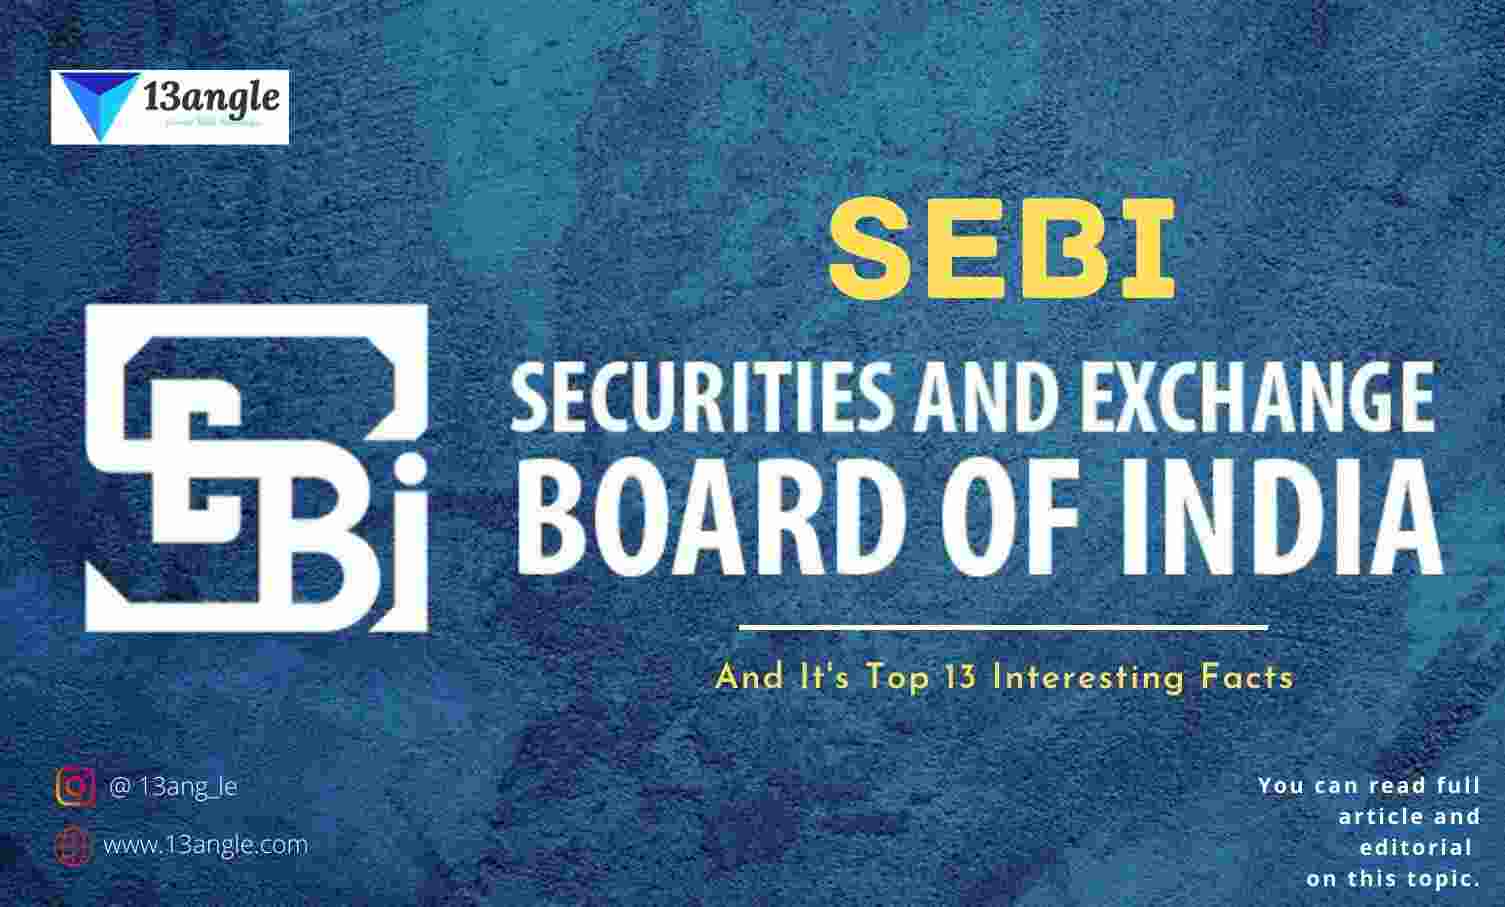 SEBI And And It's Top 13 Interesting Facts- 13angle.com